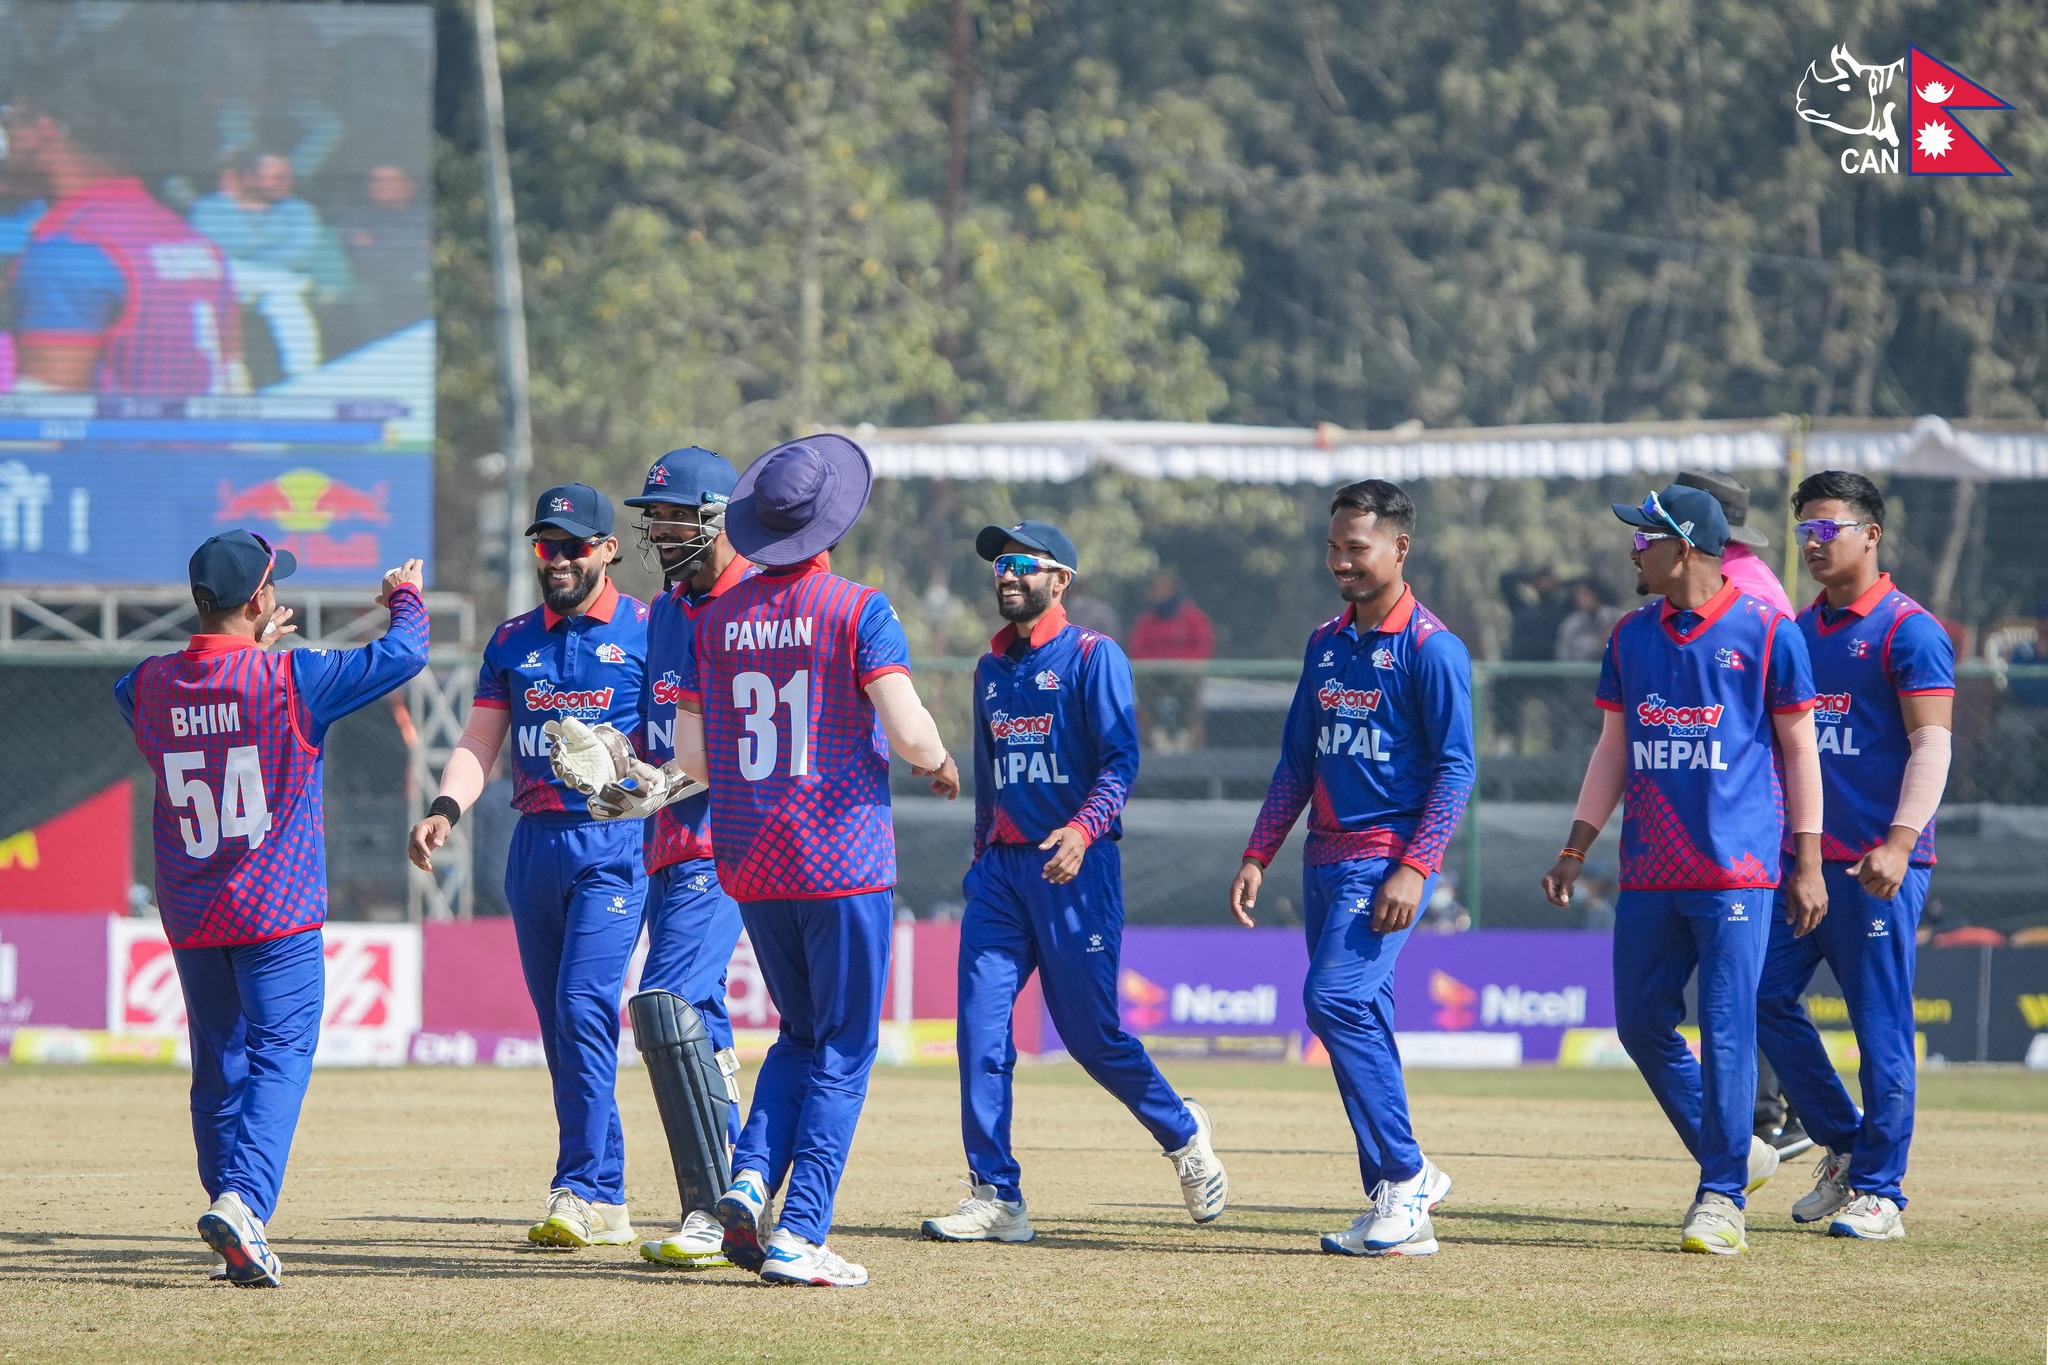 Nepal’s ‘clean sweep’ in the series against Canada